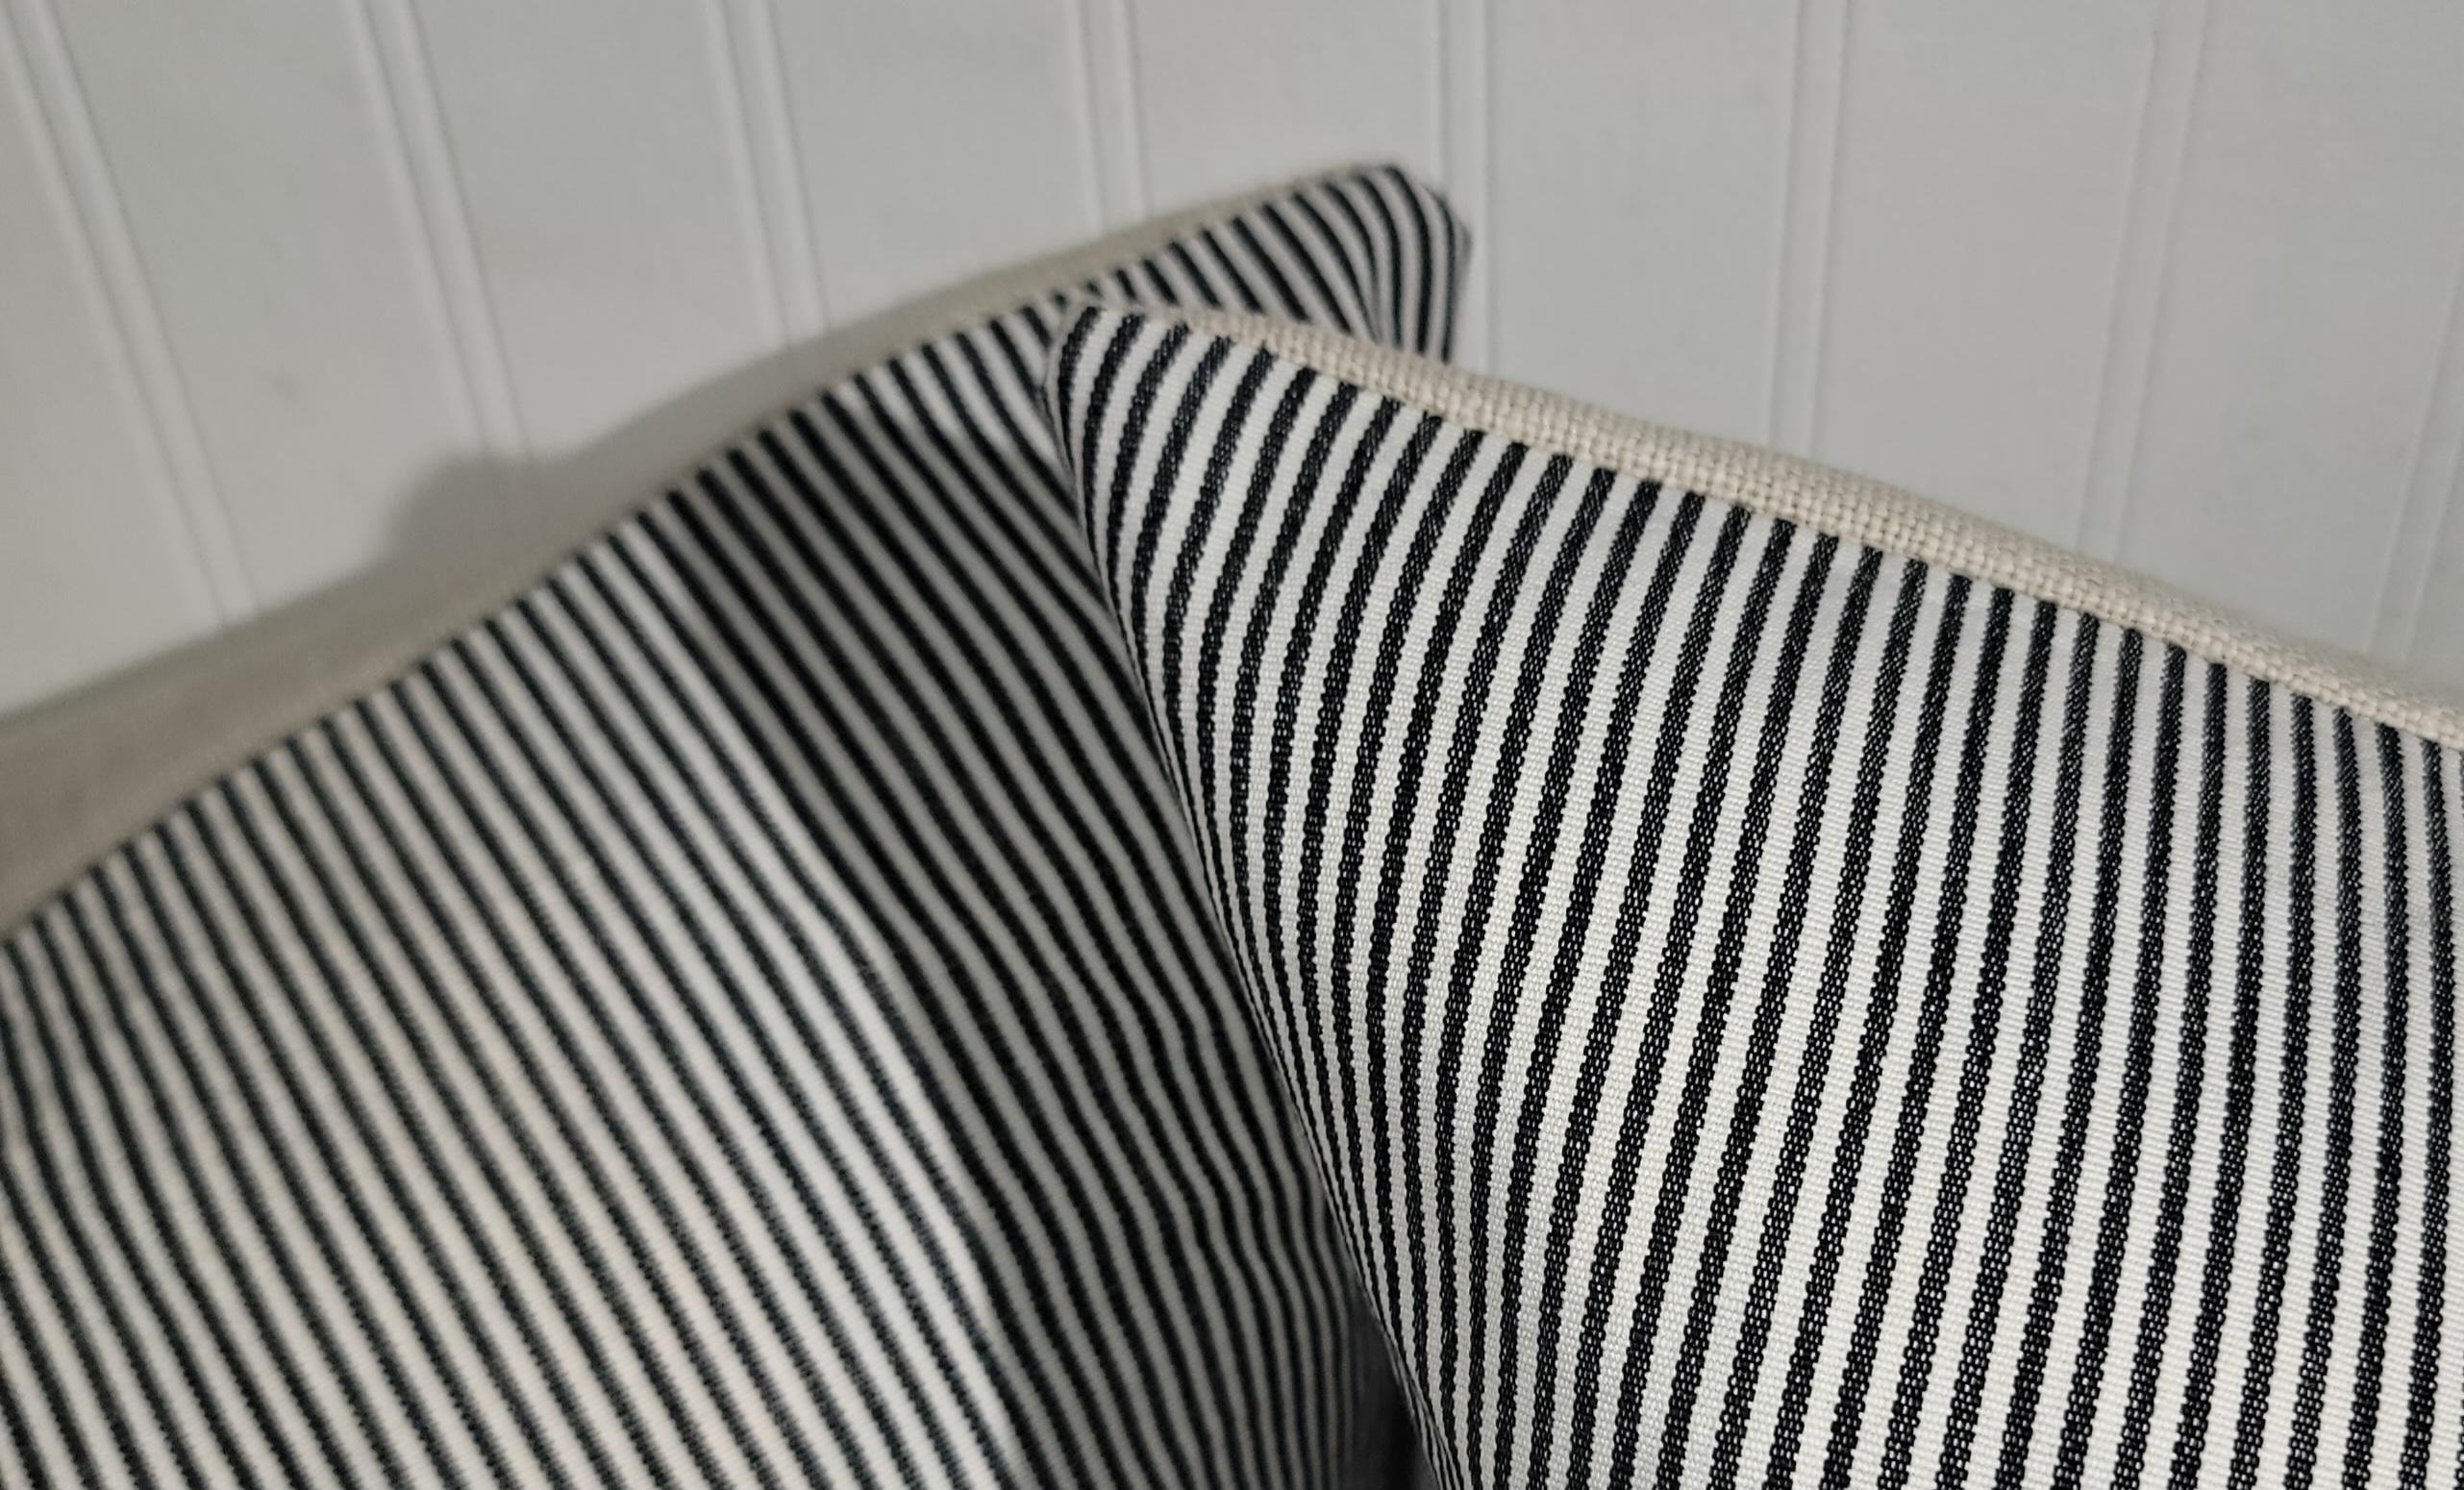 Pair of Striped Cotton Ticking Pillows. Ticking pillows have cotton linen backing. The stripes are thin and narrow throughout the entire front of the pillow.
The linen backing is a wonderful beige. 